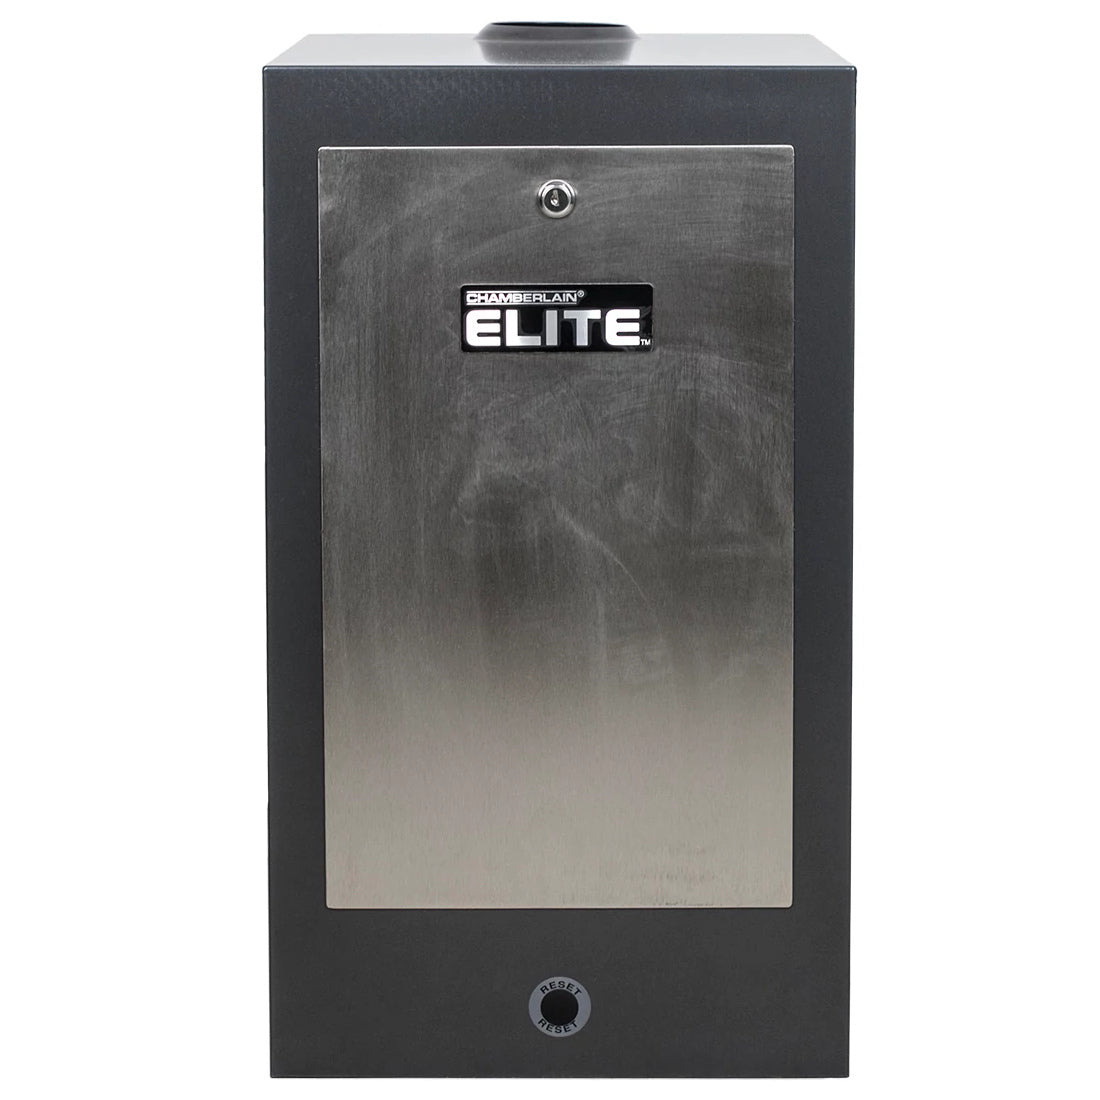 Elite ﻿Q269 Stainless Steel Cover, CSW200